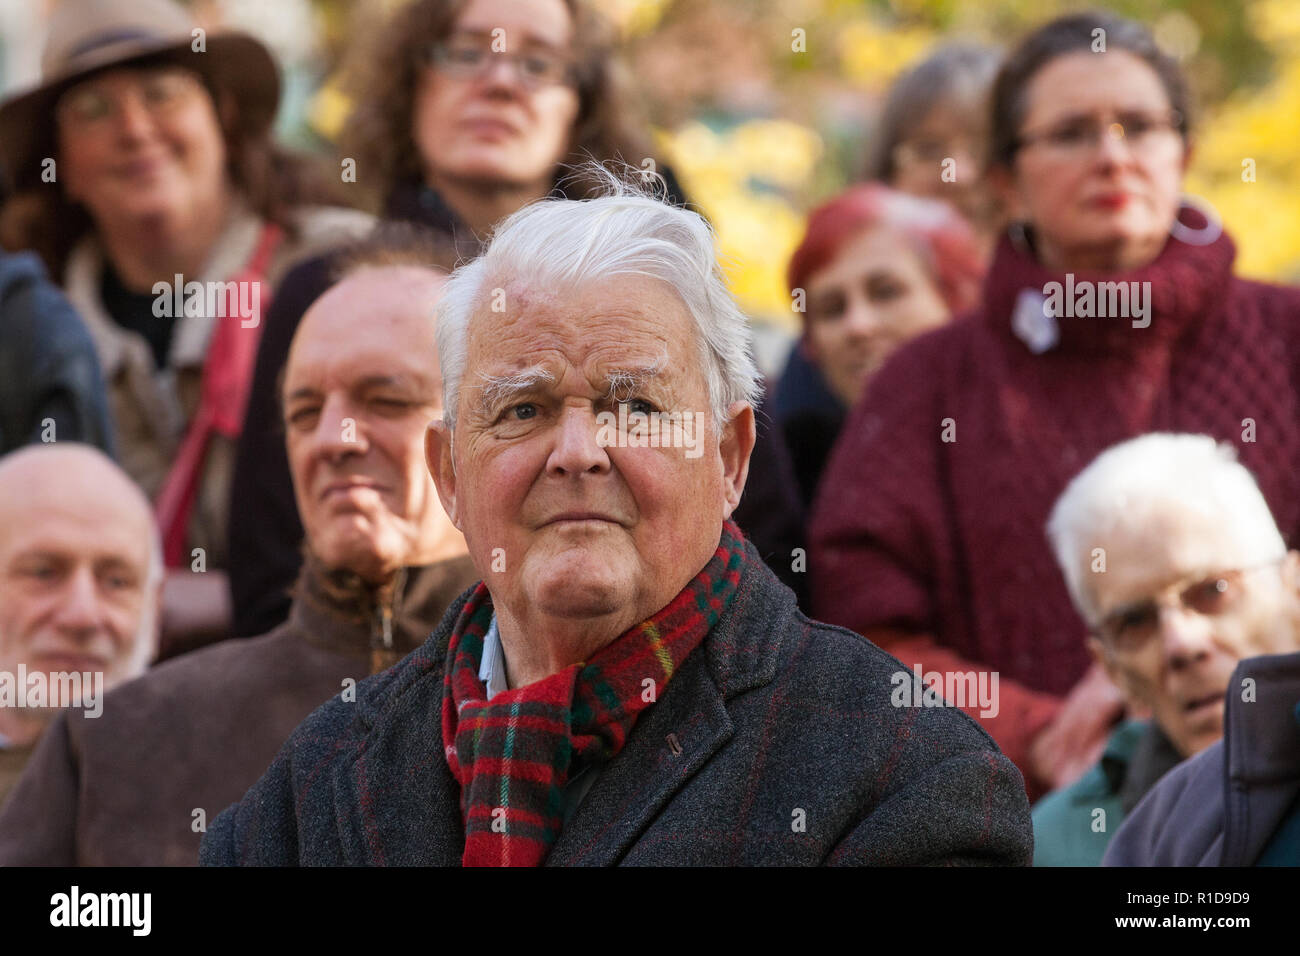 London, UK. 11th November, 2018. Bruce Kent, Vice-President of the Campaign for Nuclear Disarmament, joins fellow pacifists at a ceremony of remembrance and peace in Tavistock Square on the centenary of the signing of the Armistice which marked the end of the First World War. Credit: Mark Kerrison/Alamy Live News Stock Photo